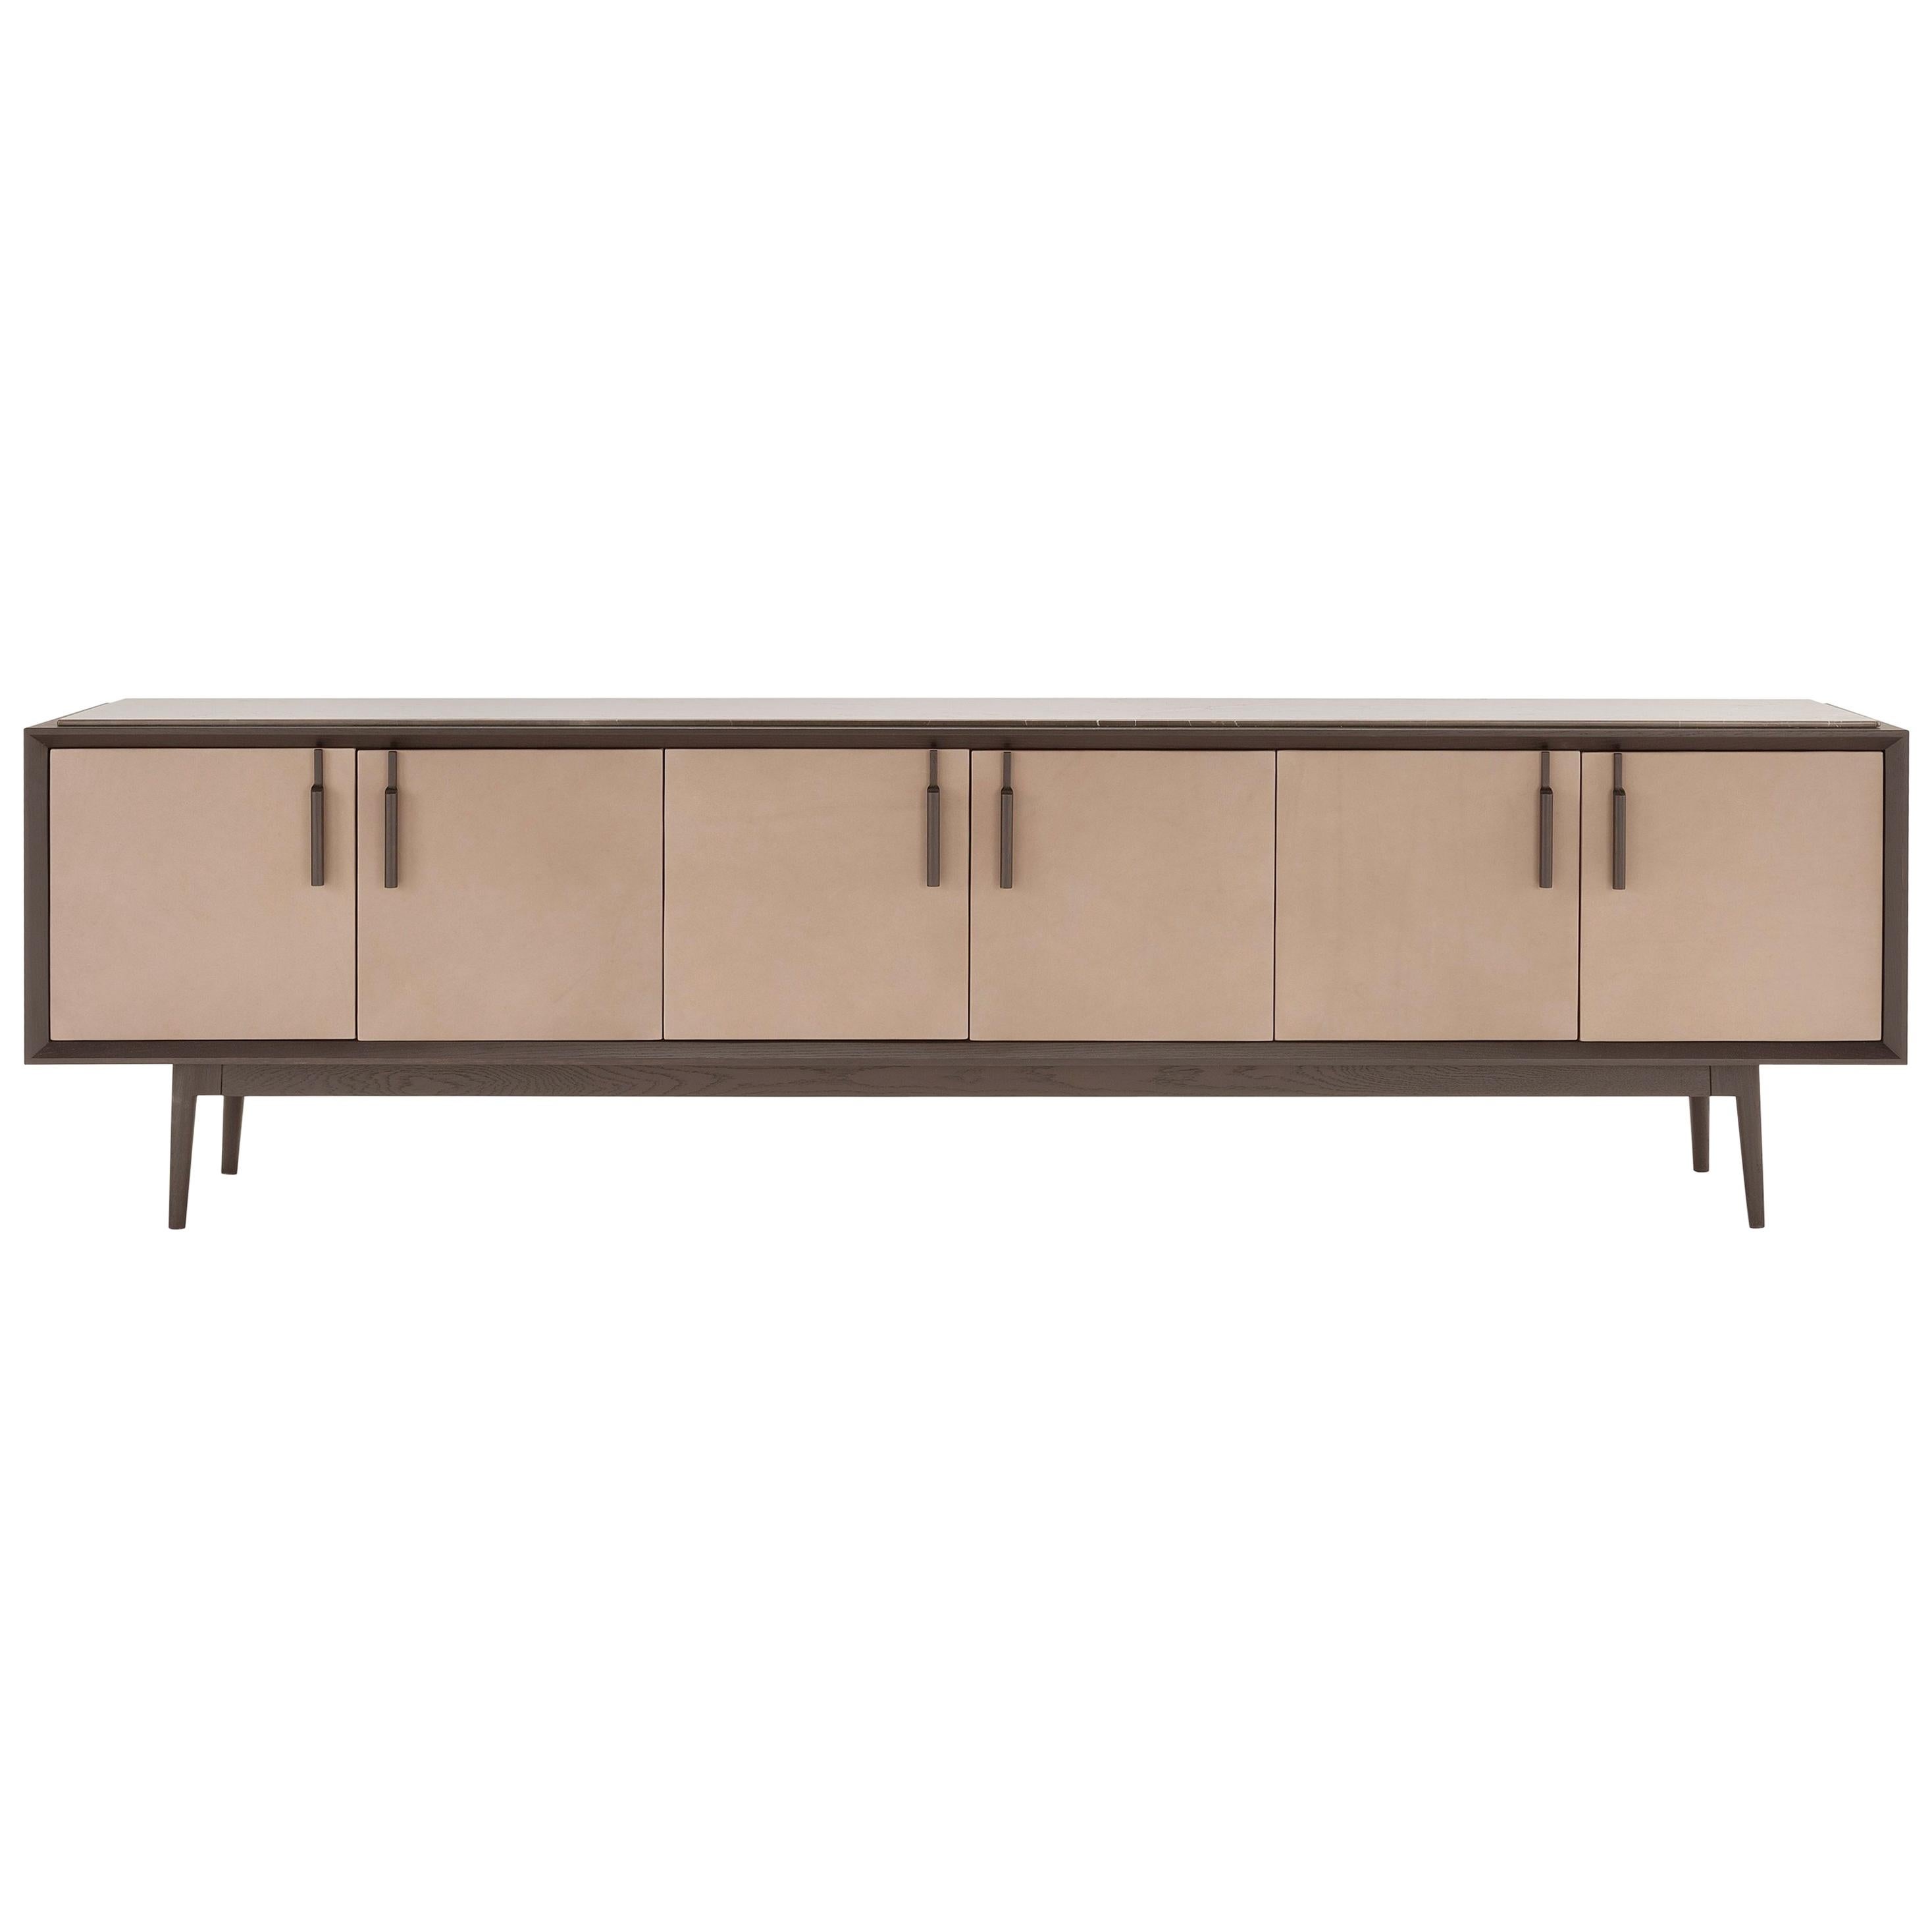 Amura 'Theo' Sideboard by Maurizio Marconato & Terry Zappa For Sale